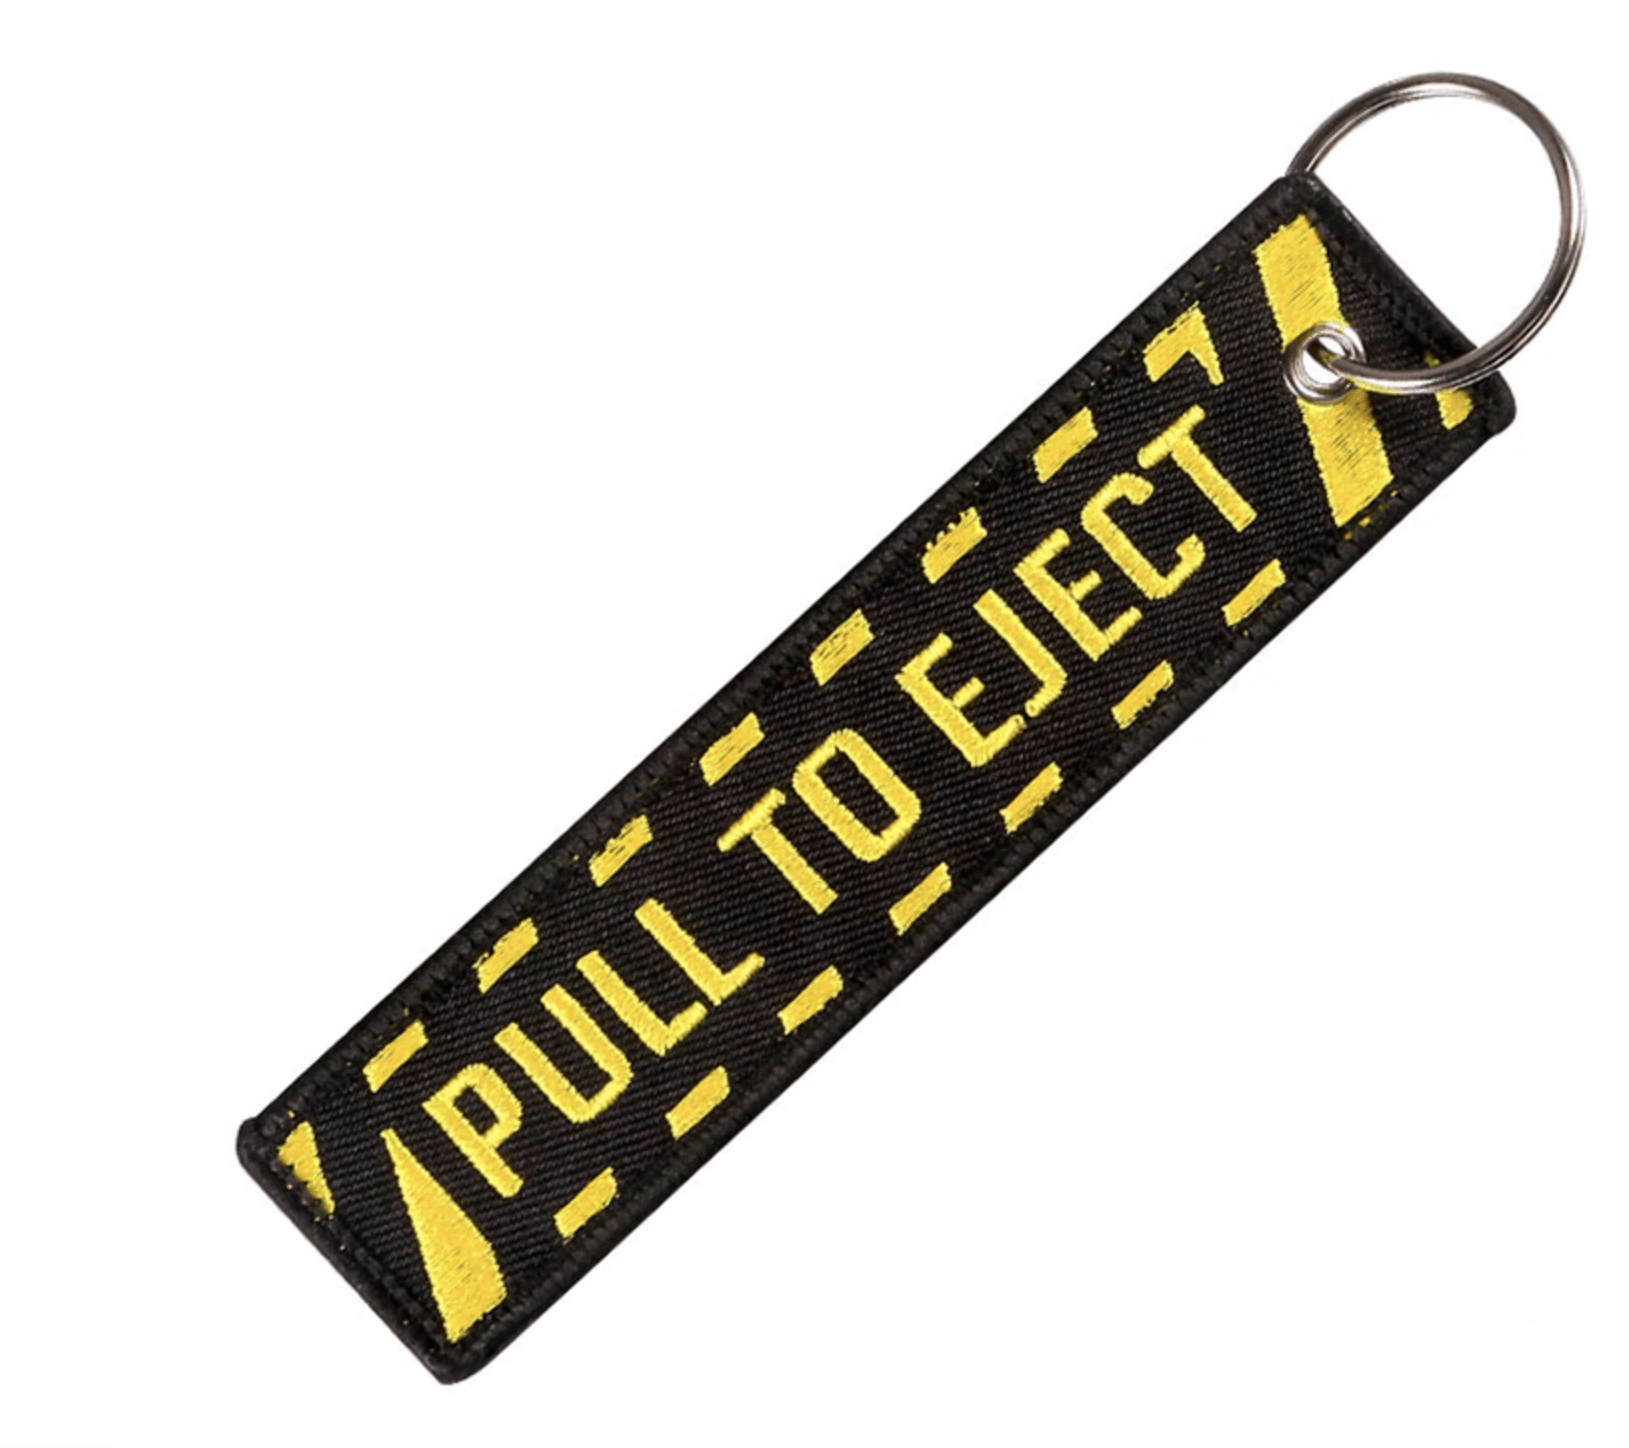 Pull To Eject Keychain - 25center.com